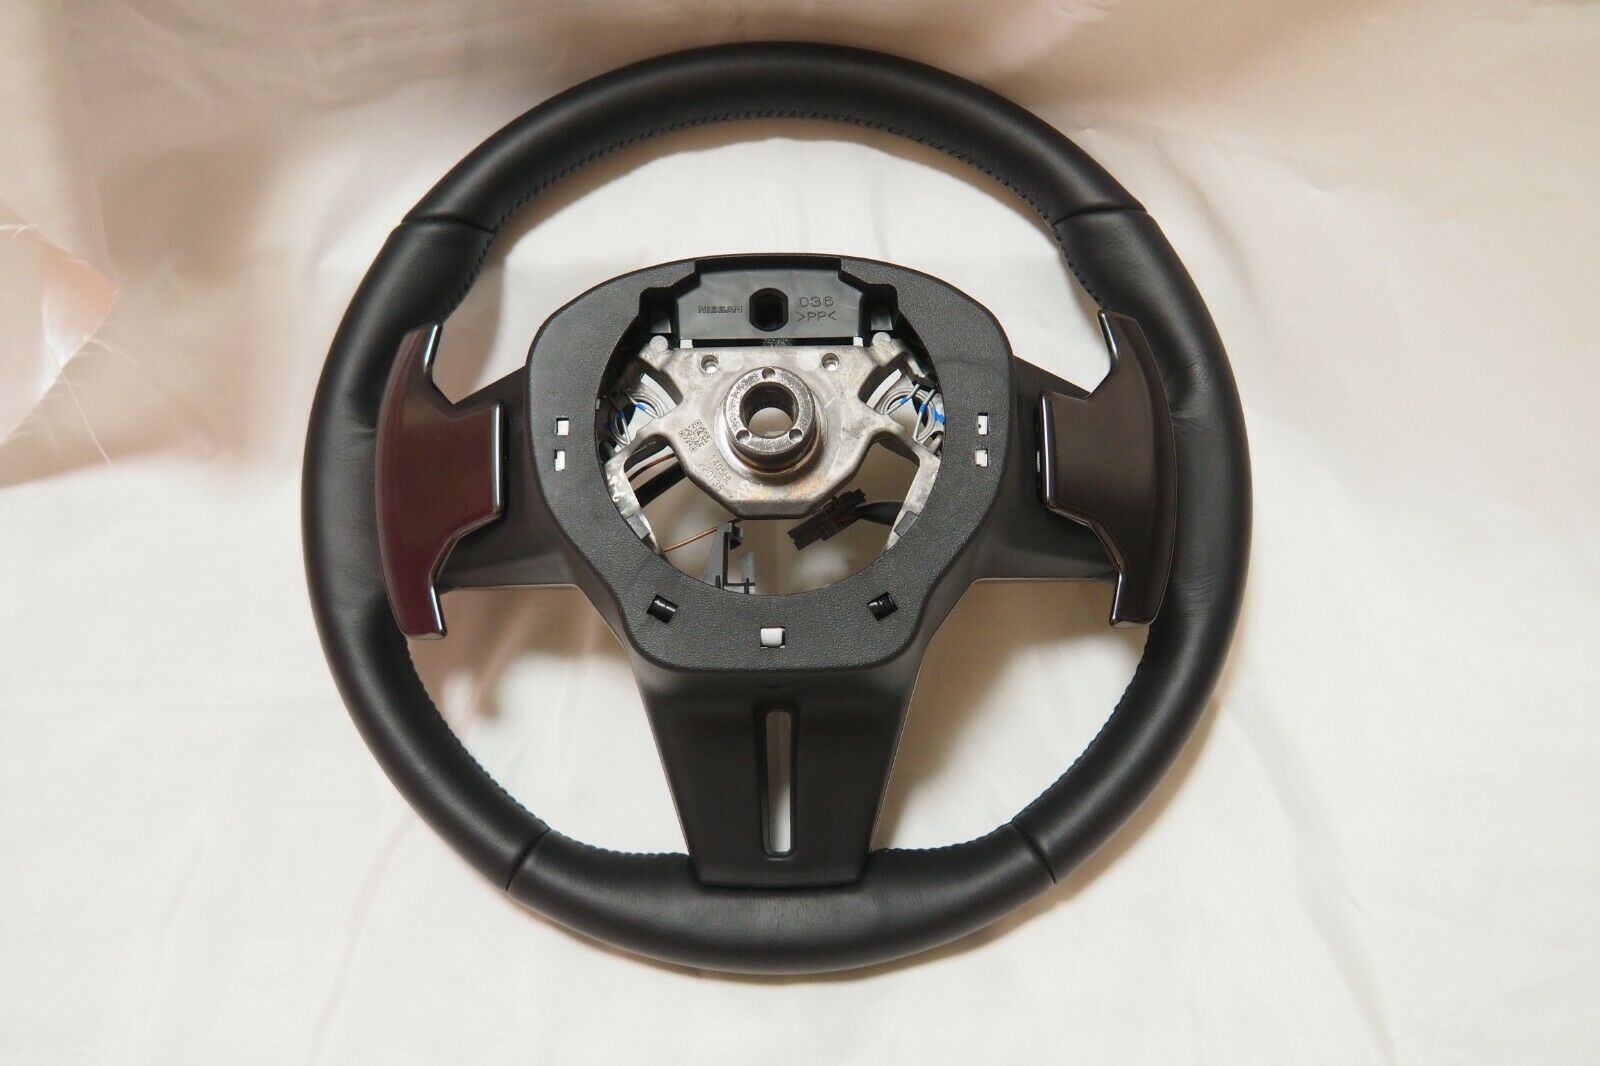 Nissan Genuine 2017- R35 GT-R Steering Wheel Black leather and Black Stitch New ★